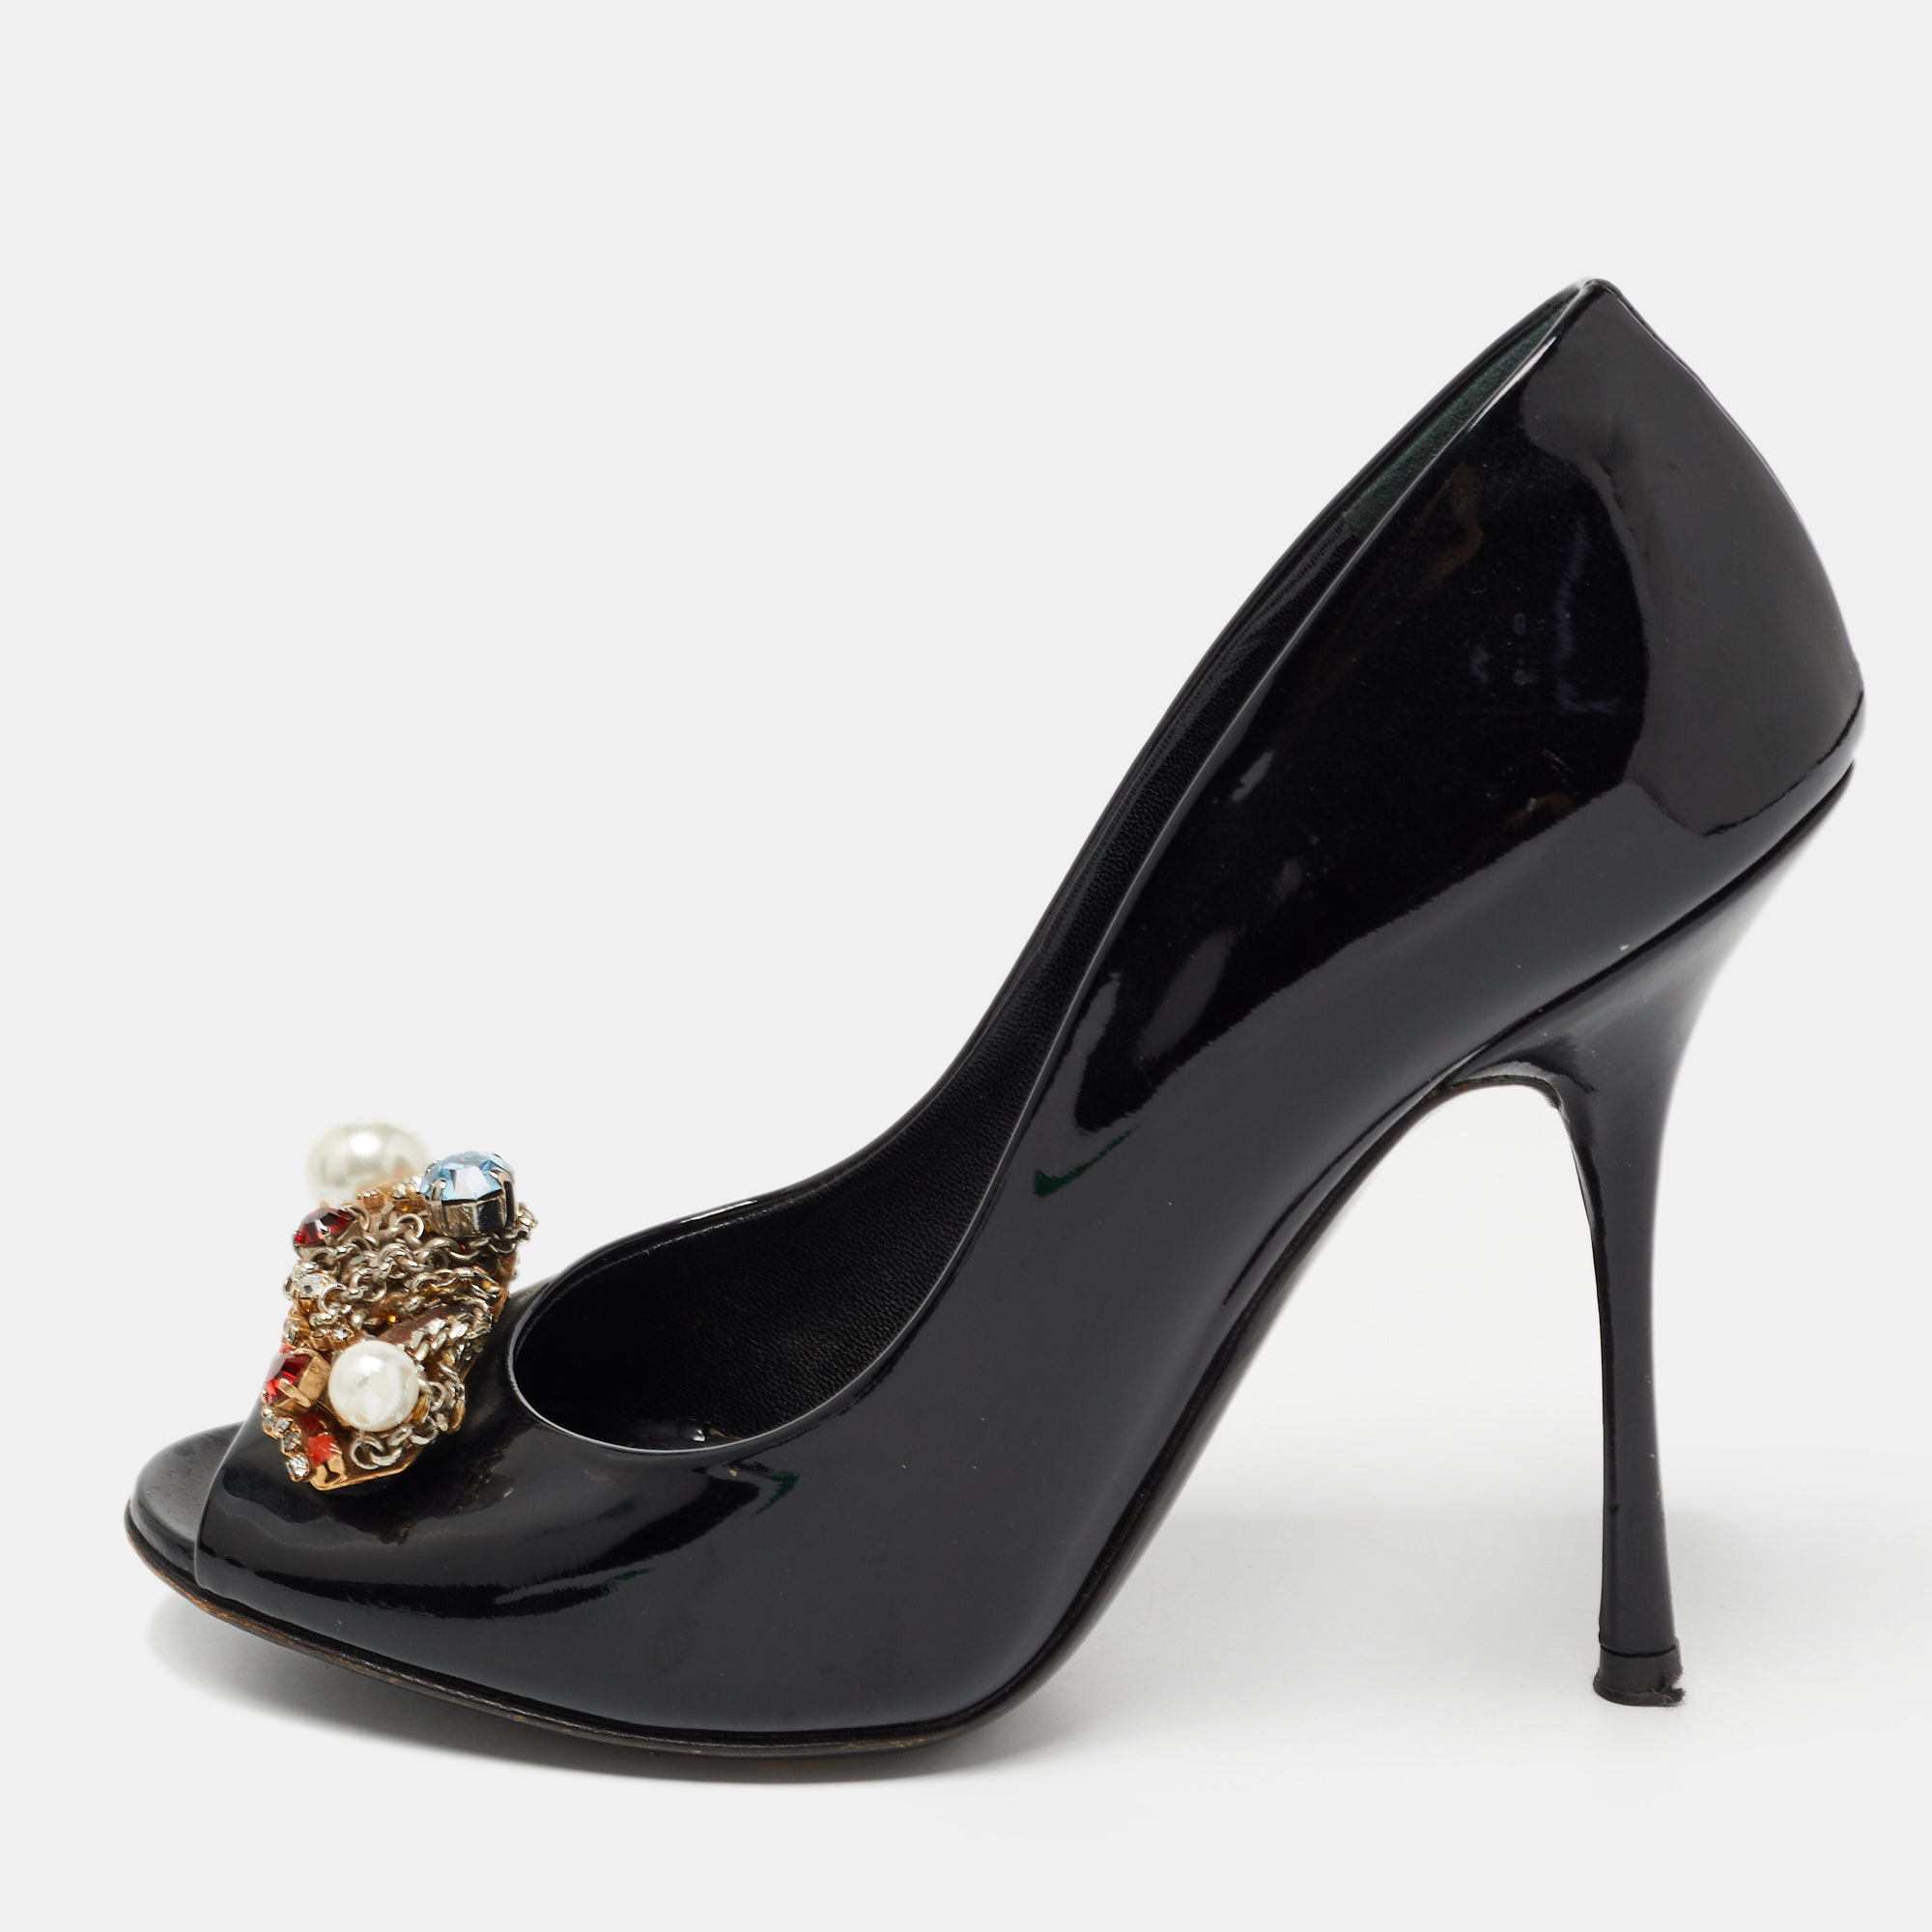 Pre-owned Dolce & Gabbana Black Patent Leather Crystal Embellished Peep Toe Pumps Size 37